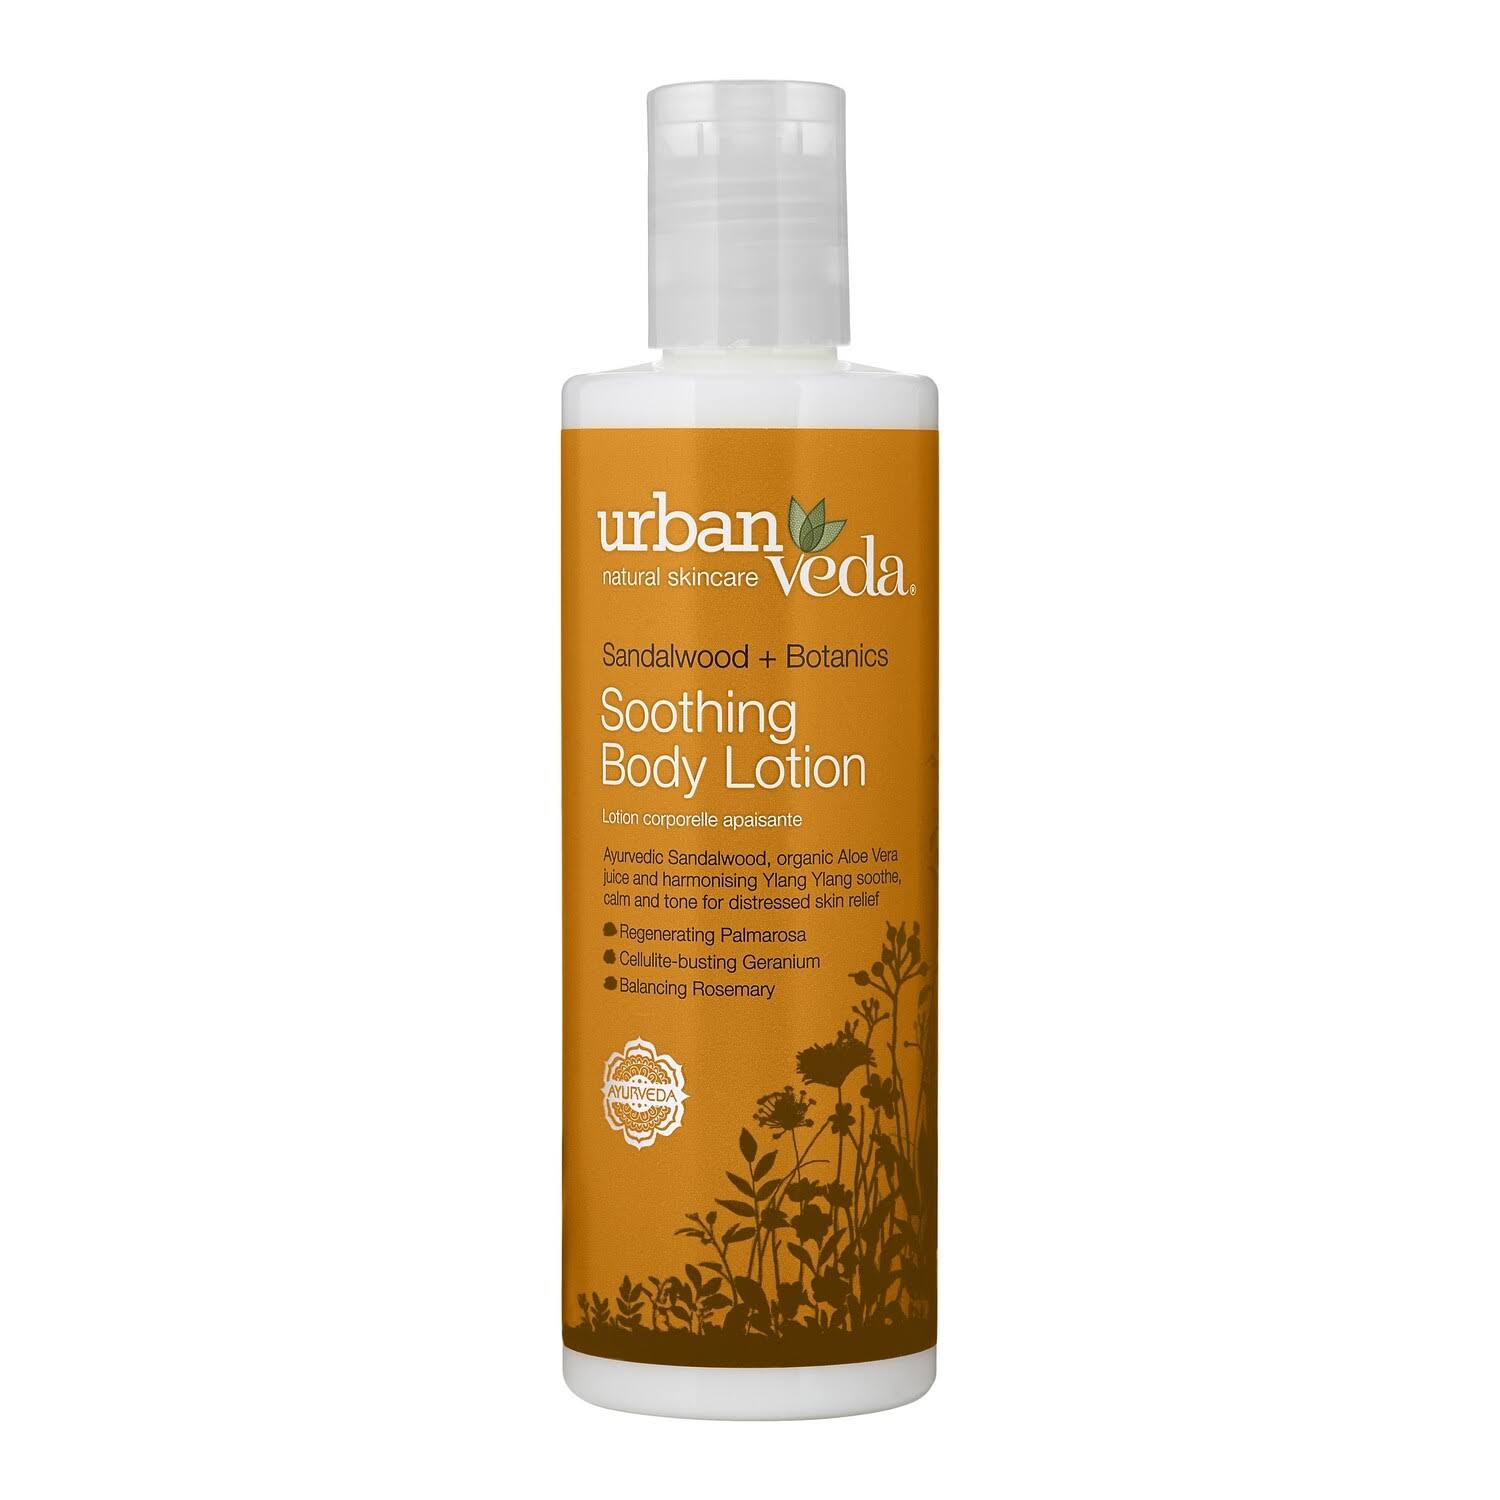 Urban Veda Soothing Body Lotion - 250ml